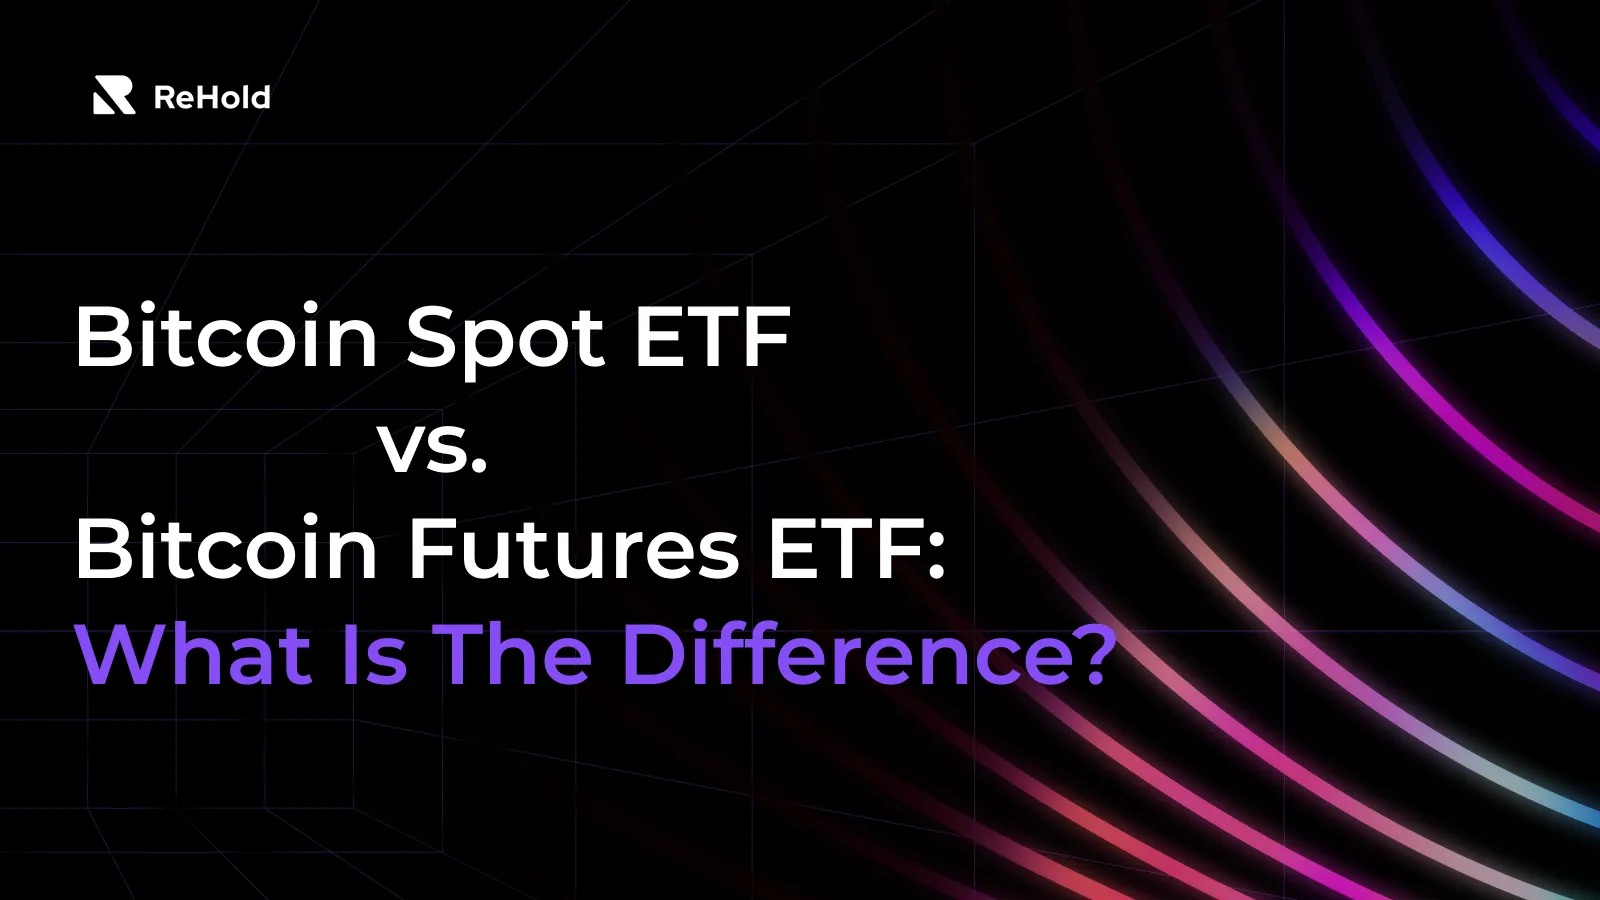 Bitcoin Spot ETF vs. Bitcoin Futures ETF: What Is The Difference?